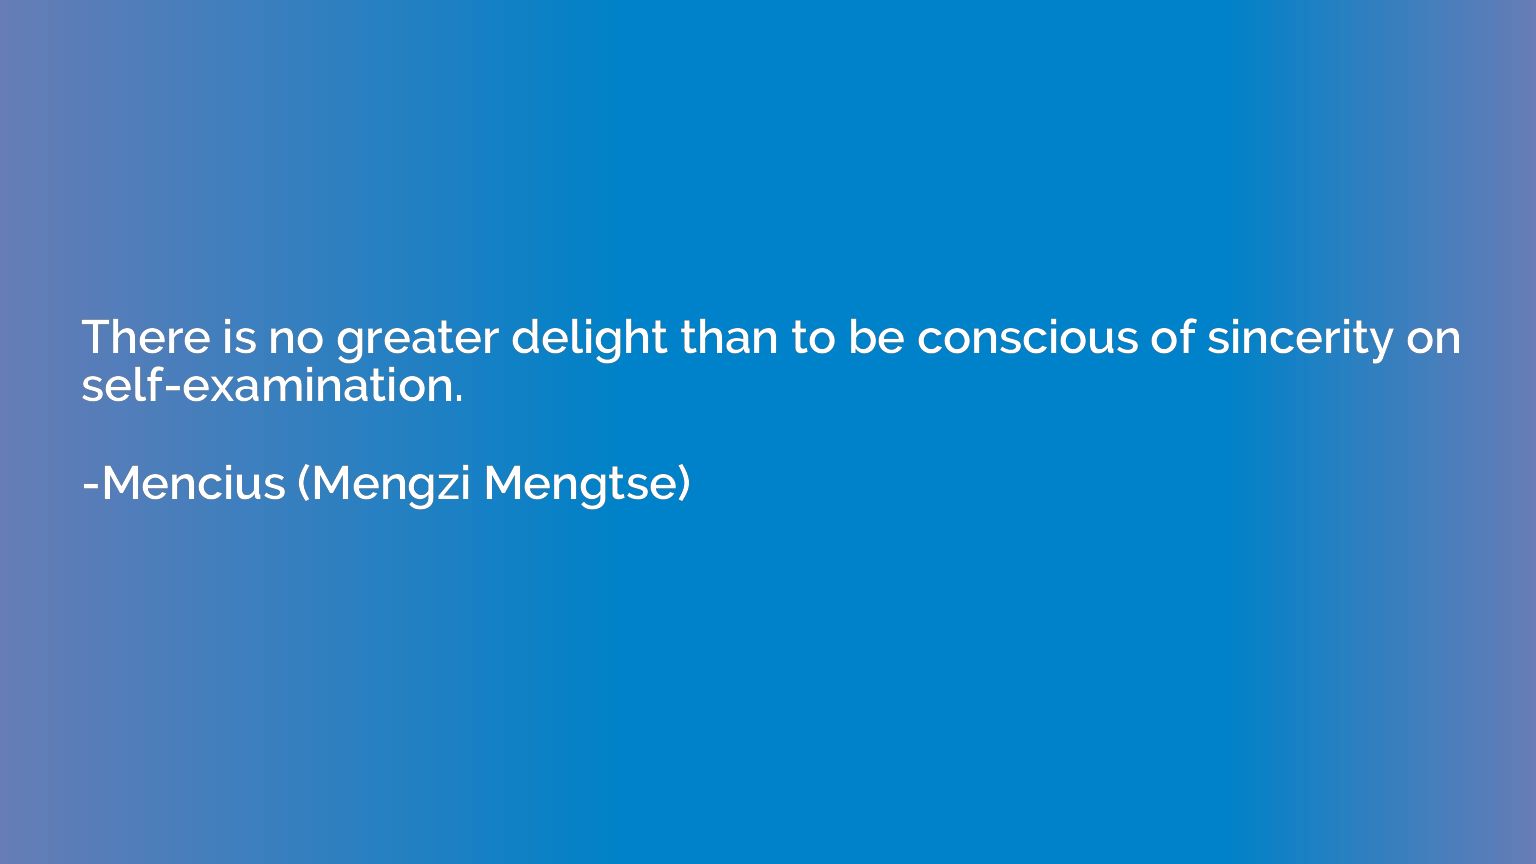 There is no greater delight than to be conscious of sincerit